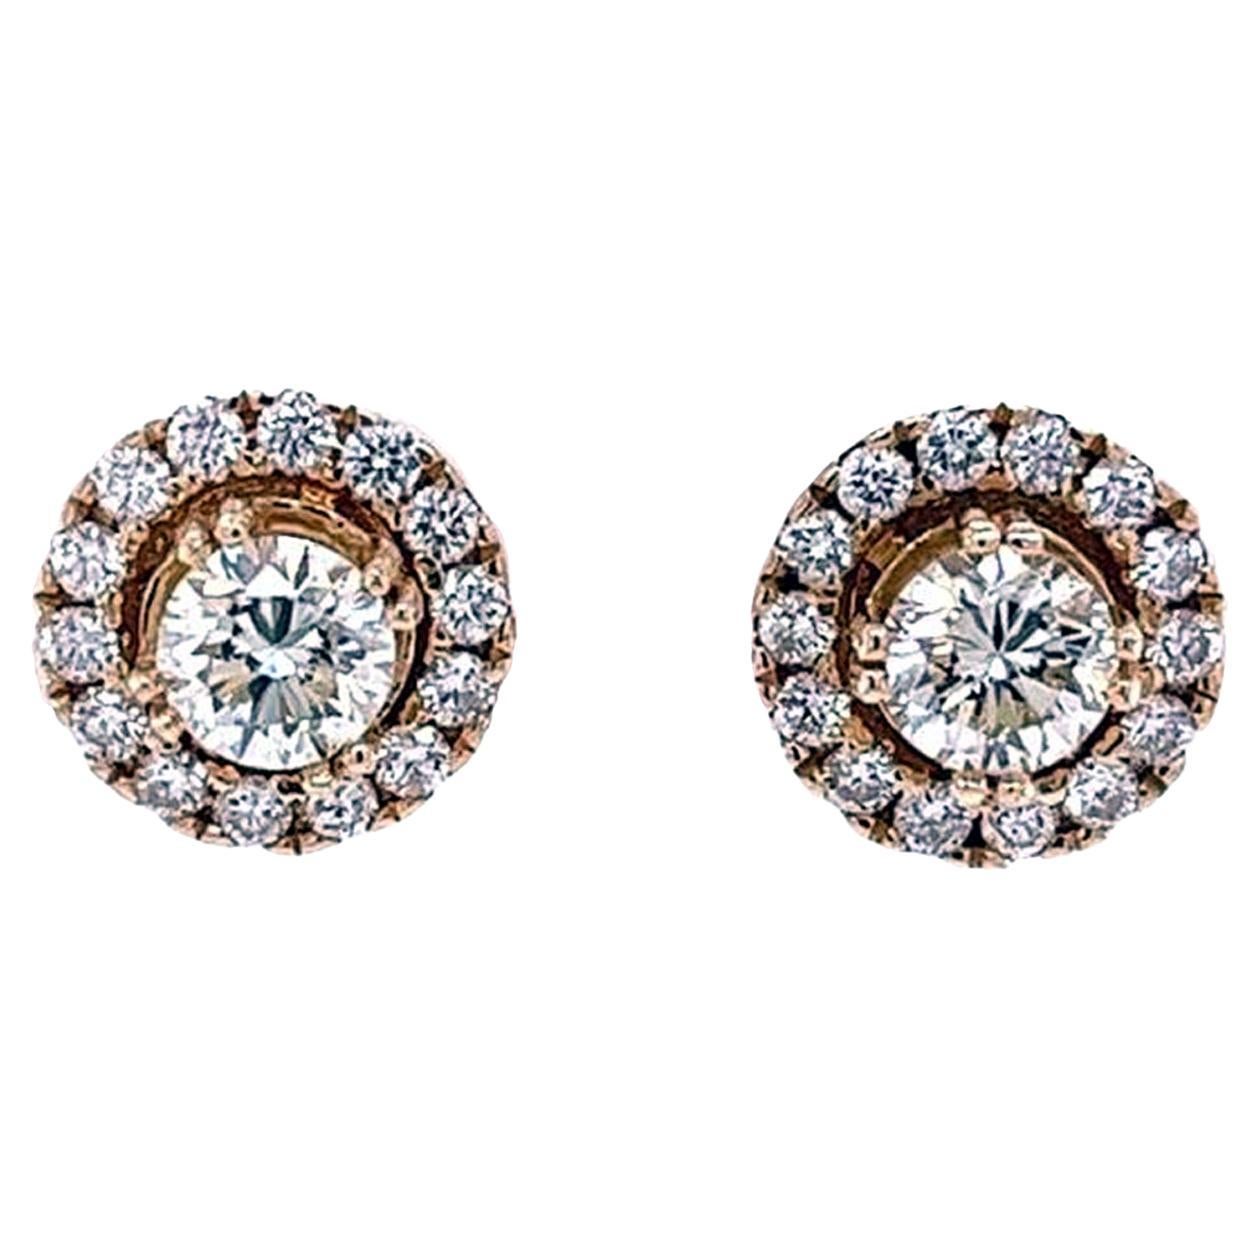 1.40ct Pave Natural Round Diamond Earrings 14K Yellow Gold Pair Si1/VS2 Clarity